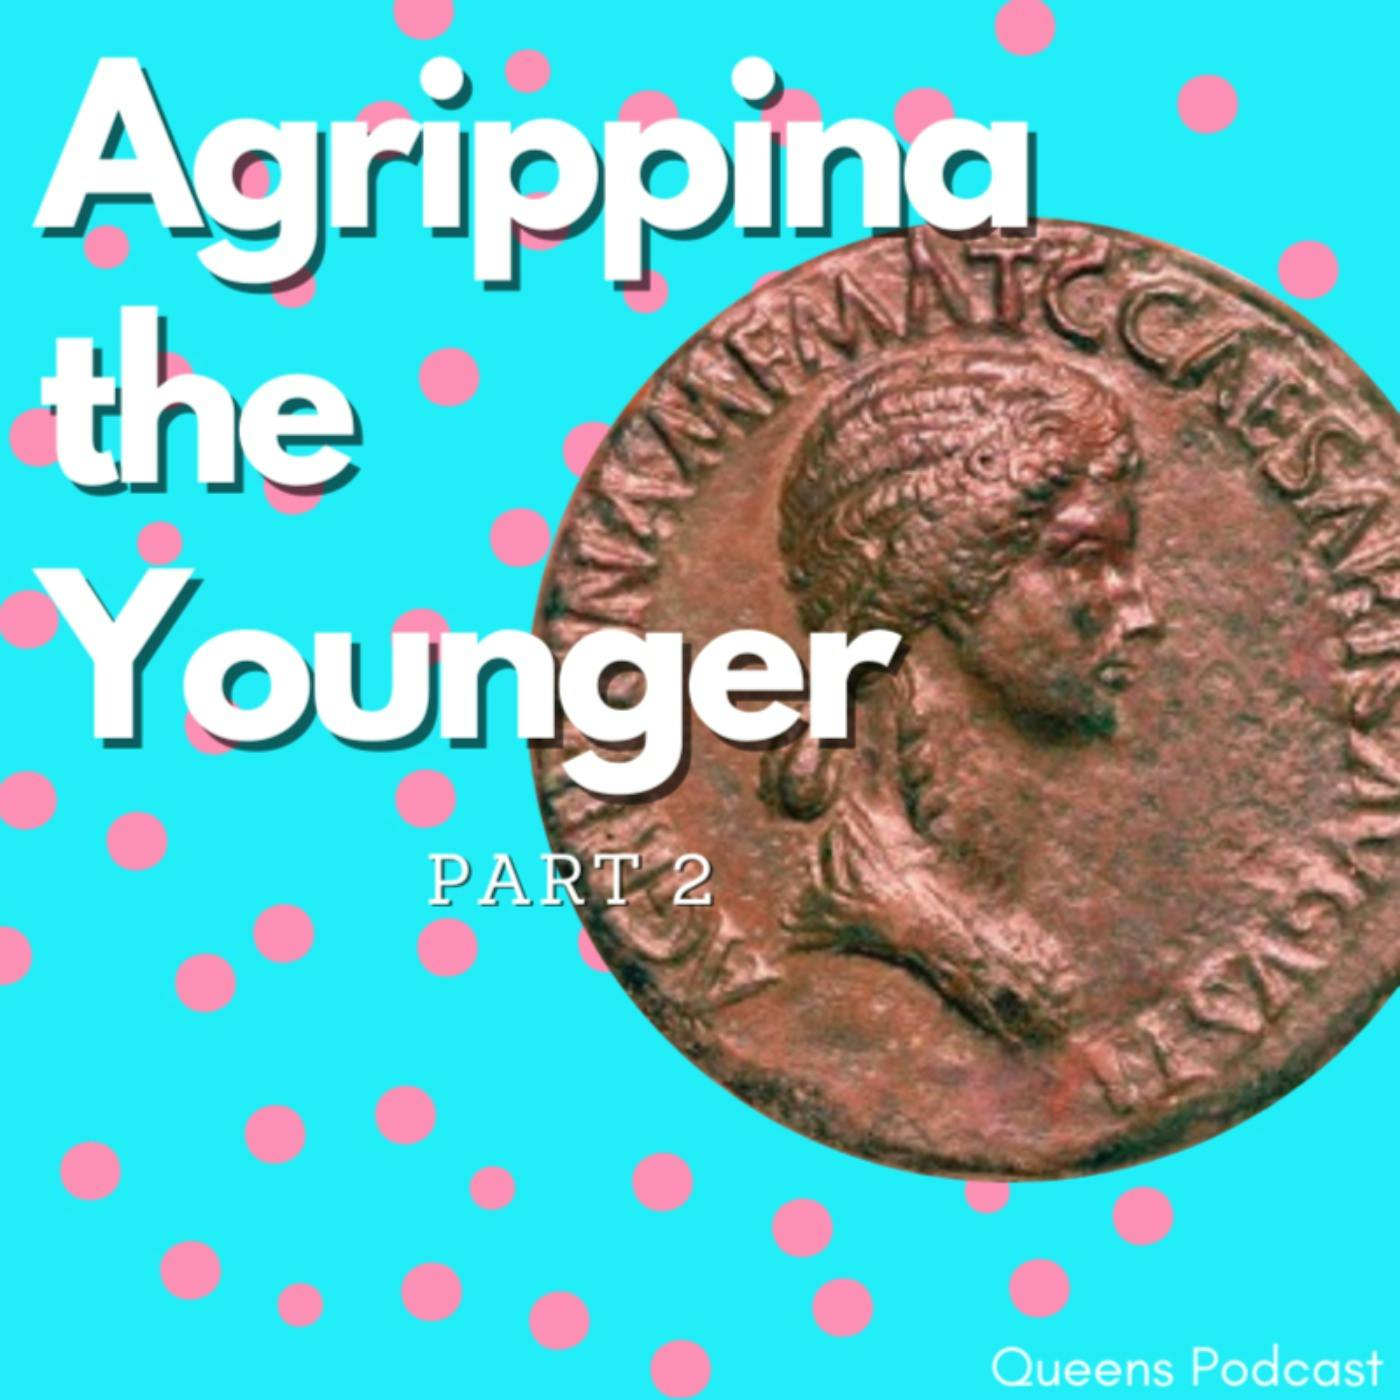 Agrippina the Younger Part 2